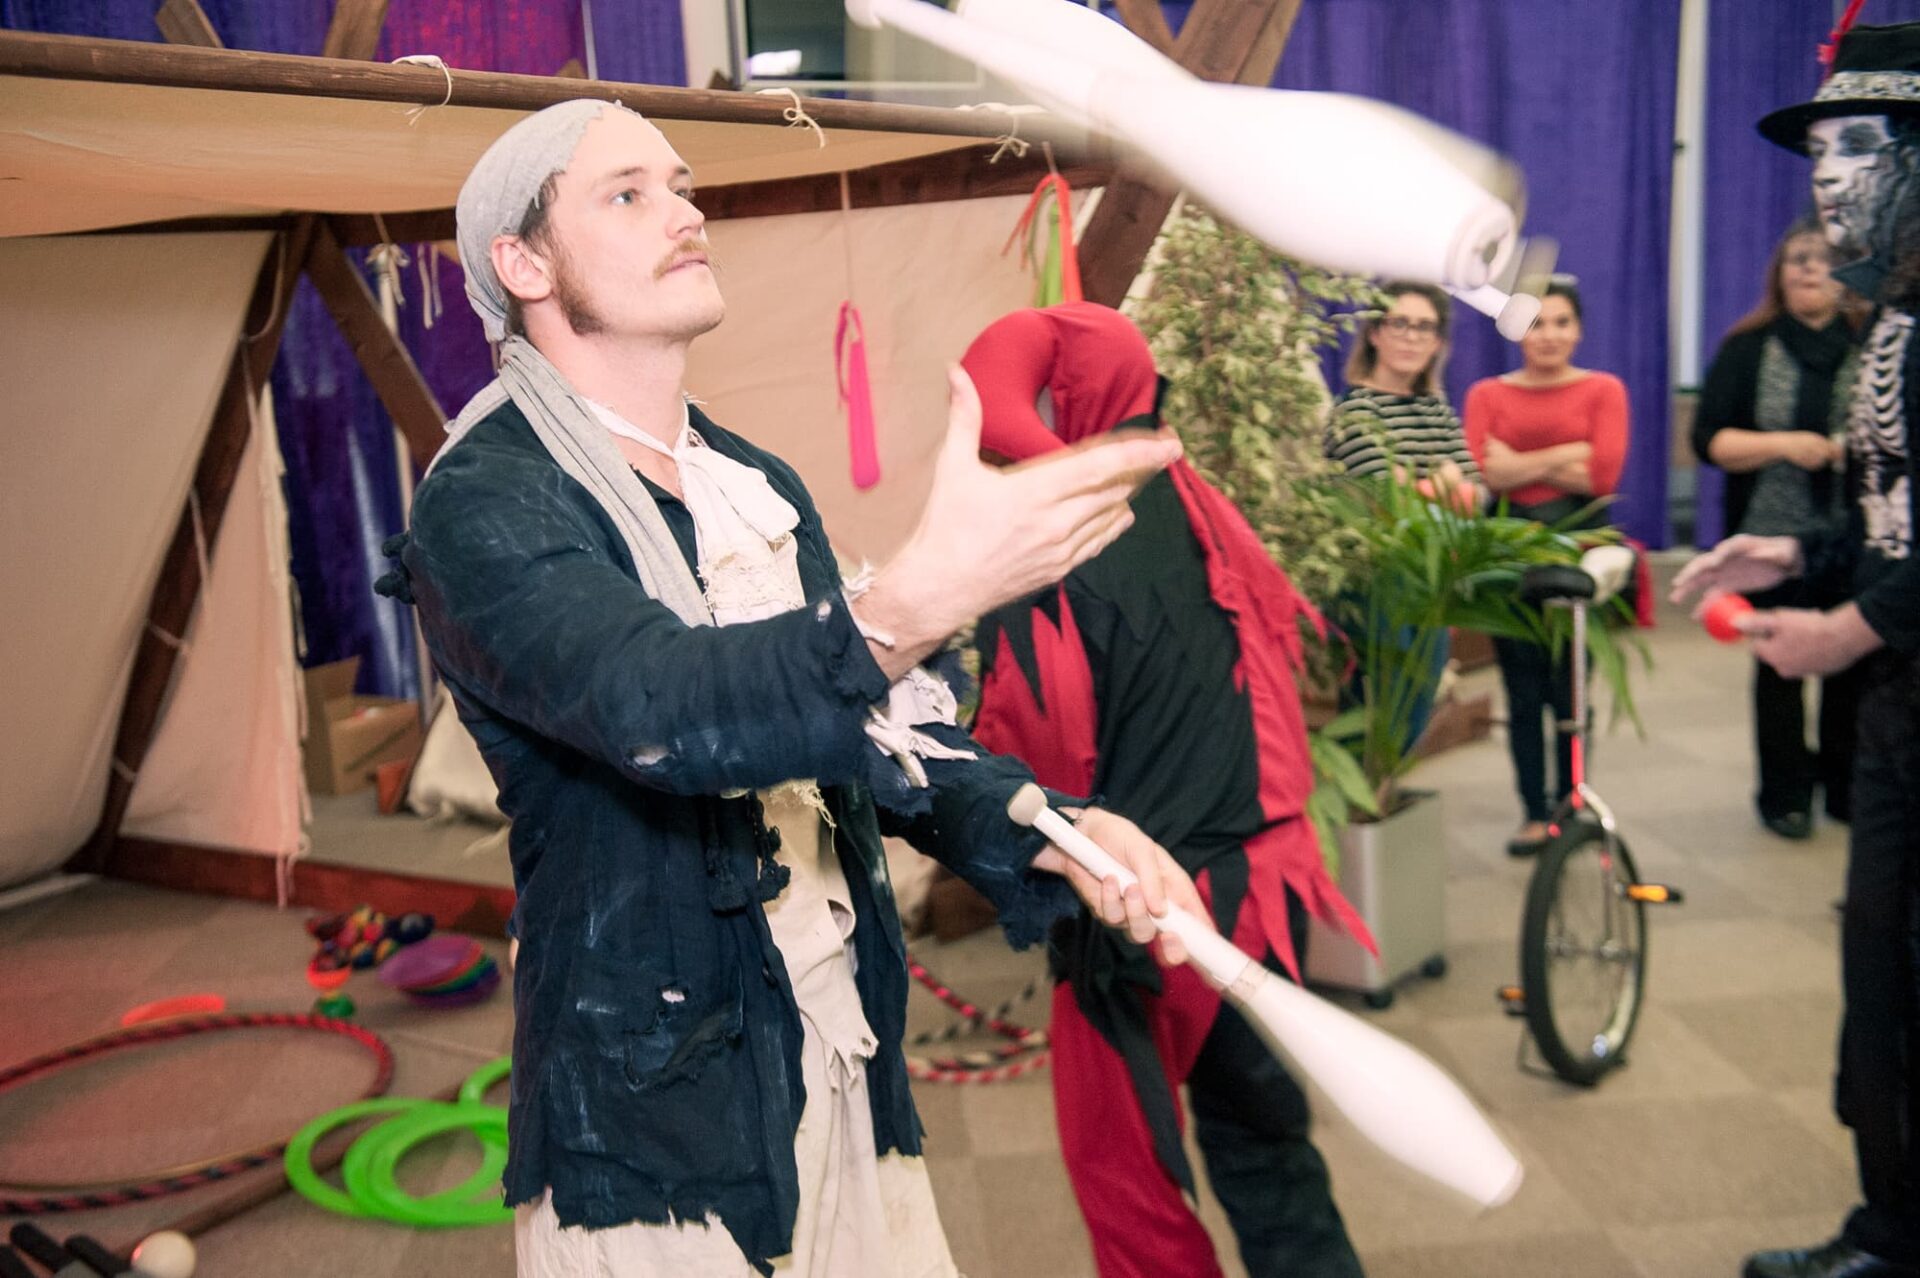 a street performer entertains guests at a company event in Dublin by juggling bowling pins